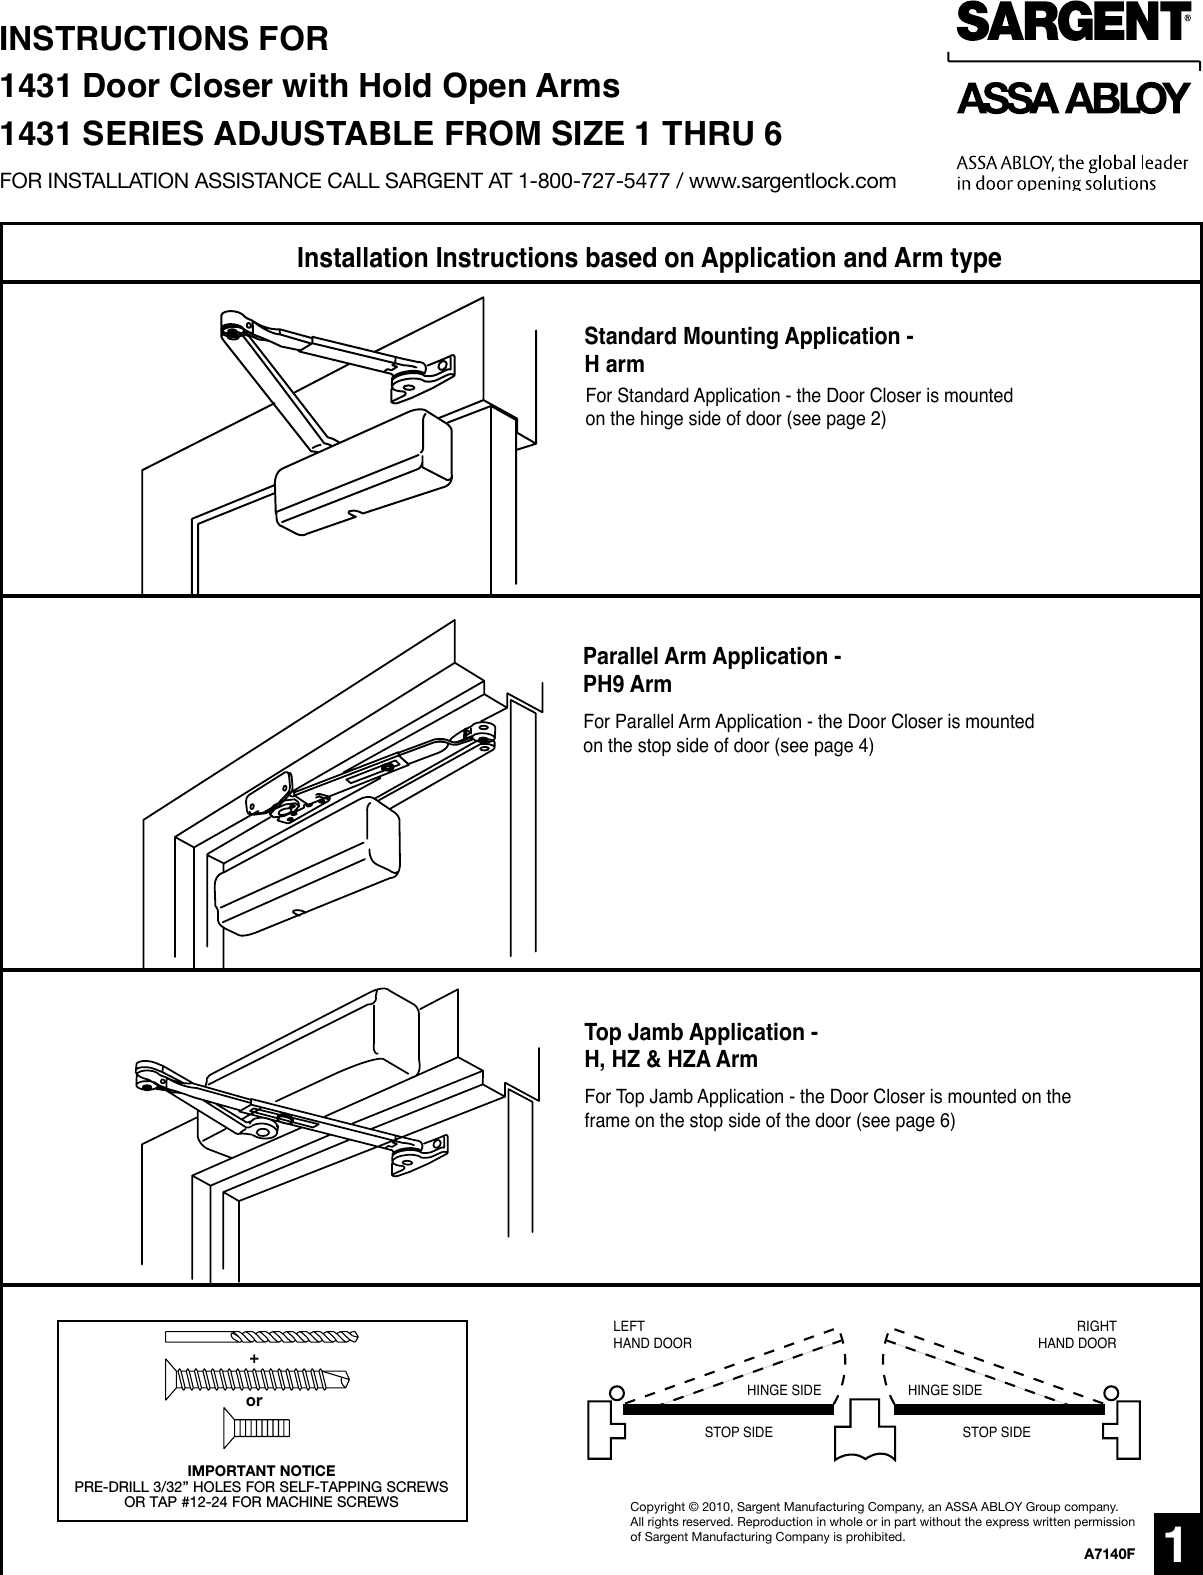 Page 1 of 8 - Sargent  Instructions For Installing 1431 Series Door Closers (with Hold Open Arms 'H'/UH/HZ/HZA/PH9) A7140F Low Res